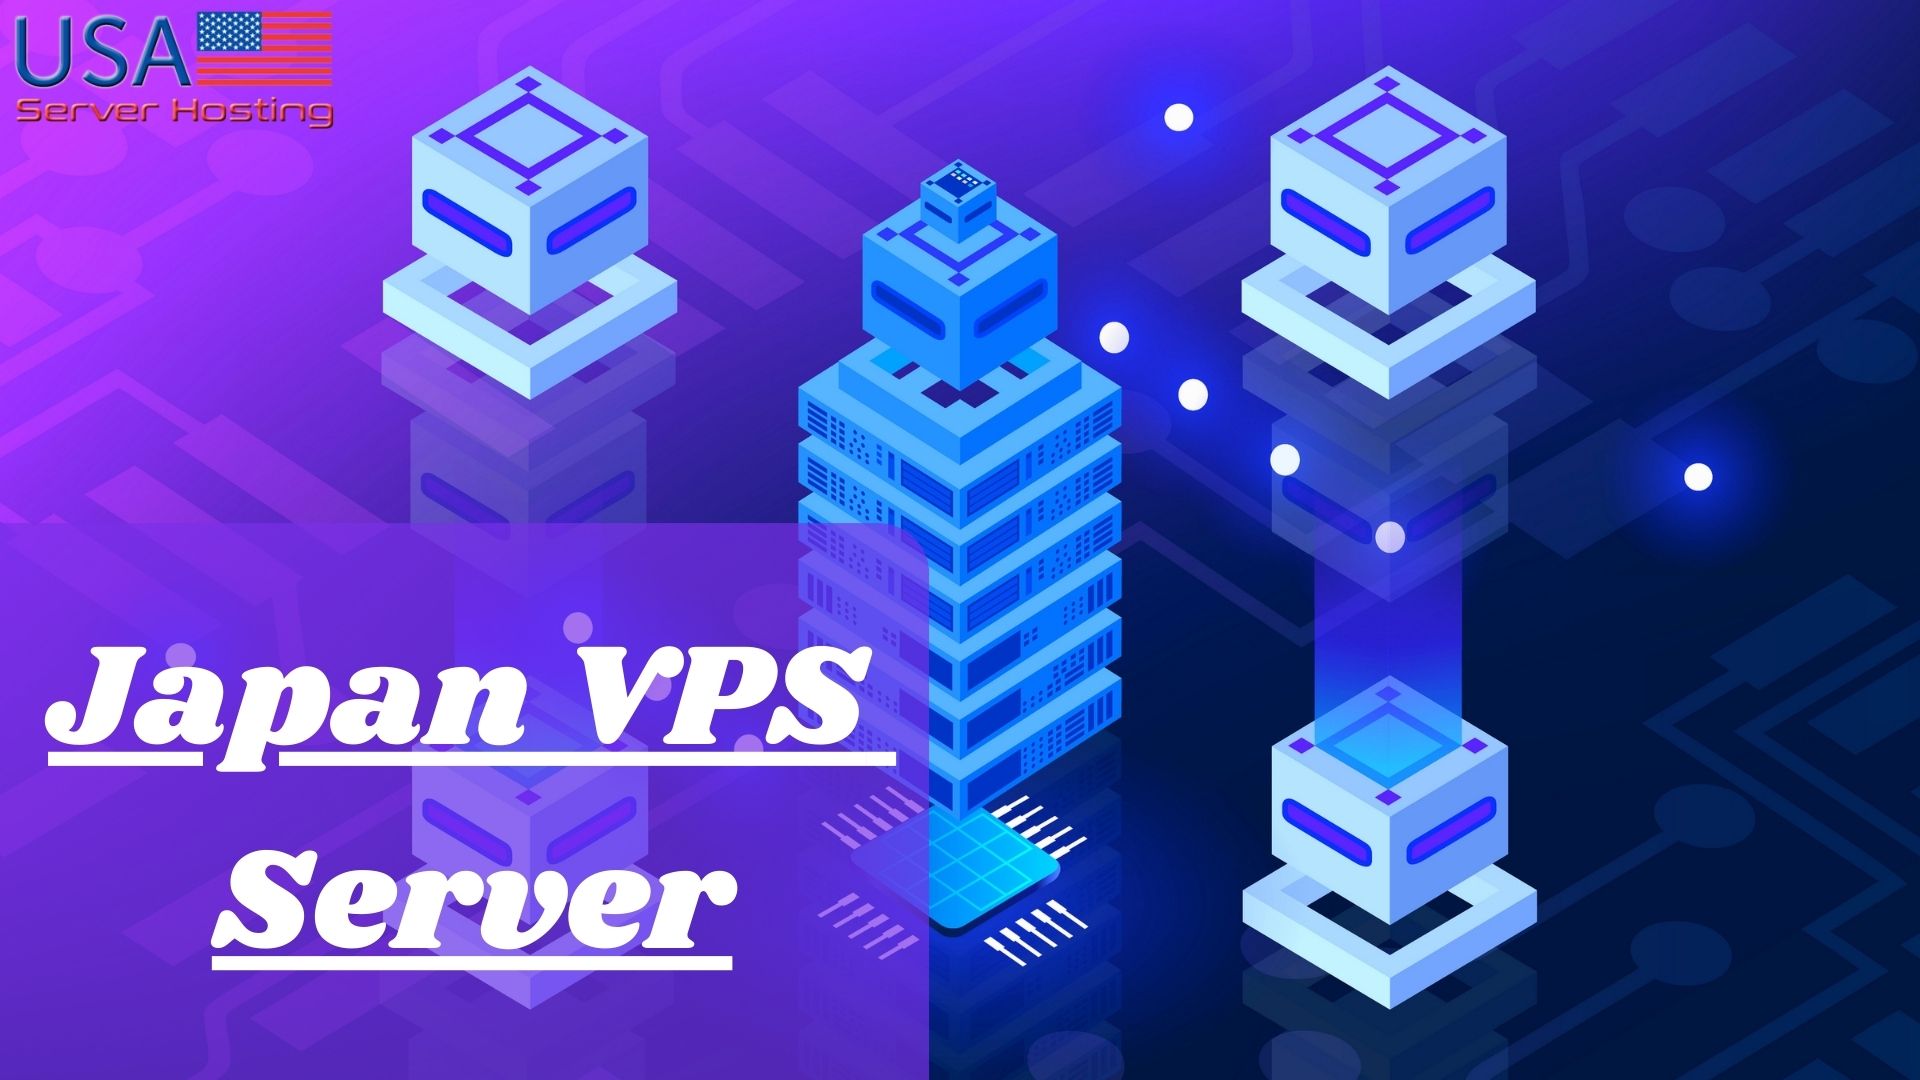 Selecting Cost-Effective Japan VPS Server by USA Server Hosting